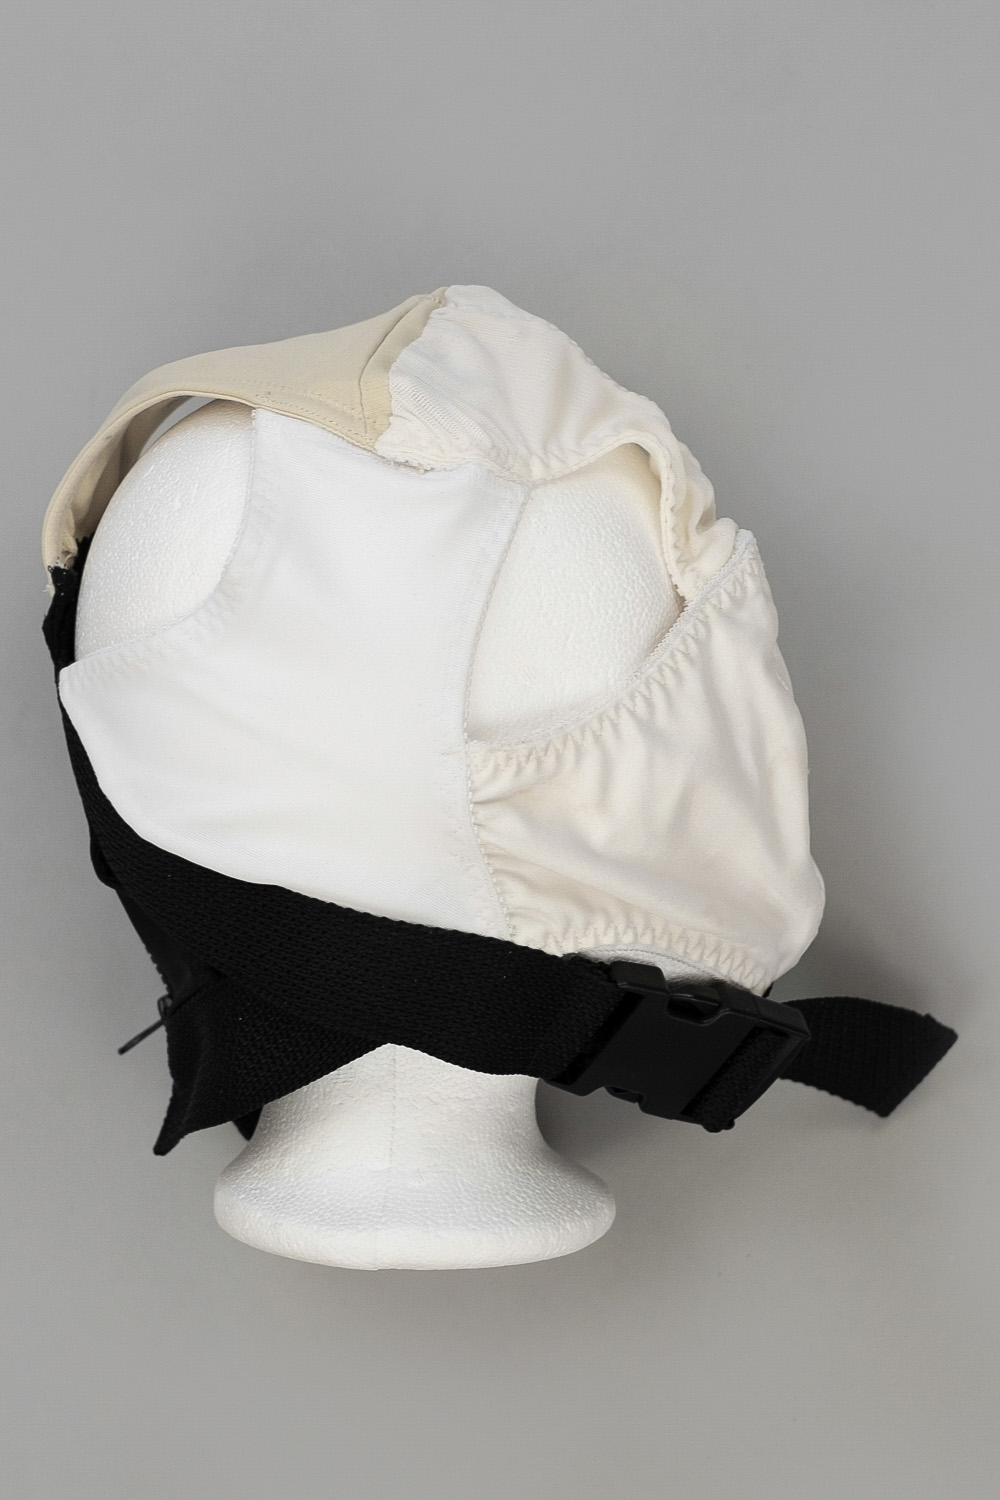 Gusset Mask in Black and White 3